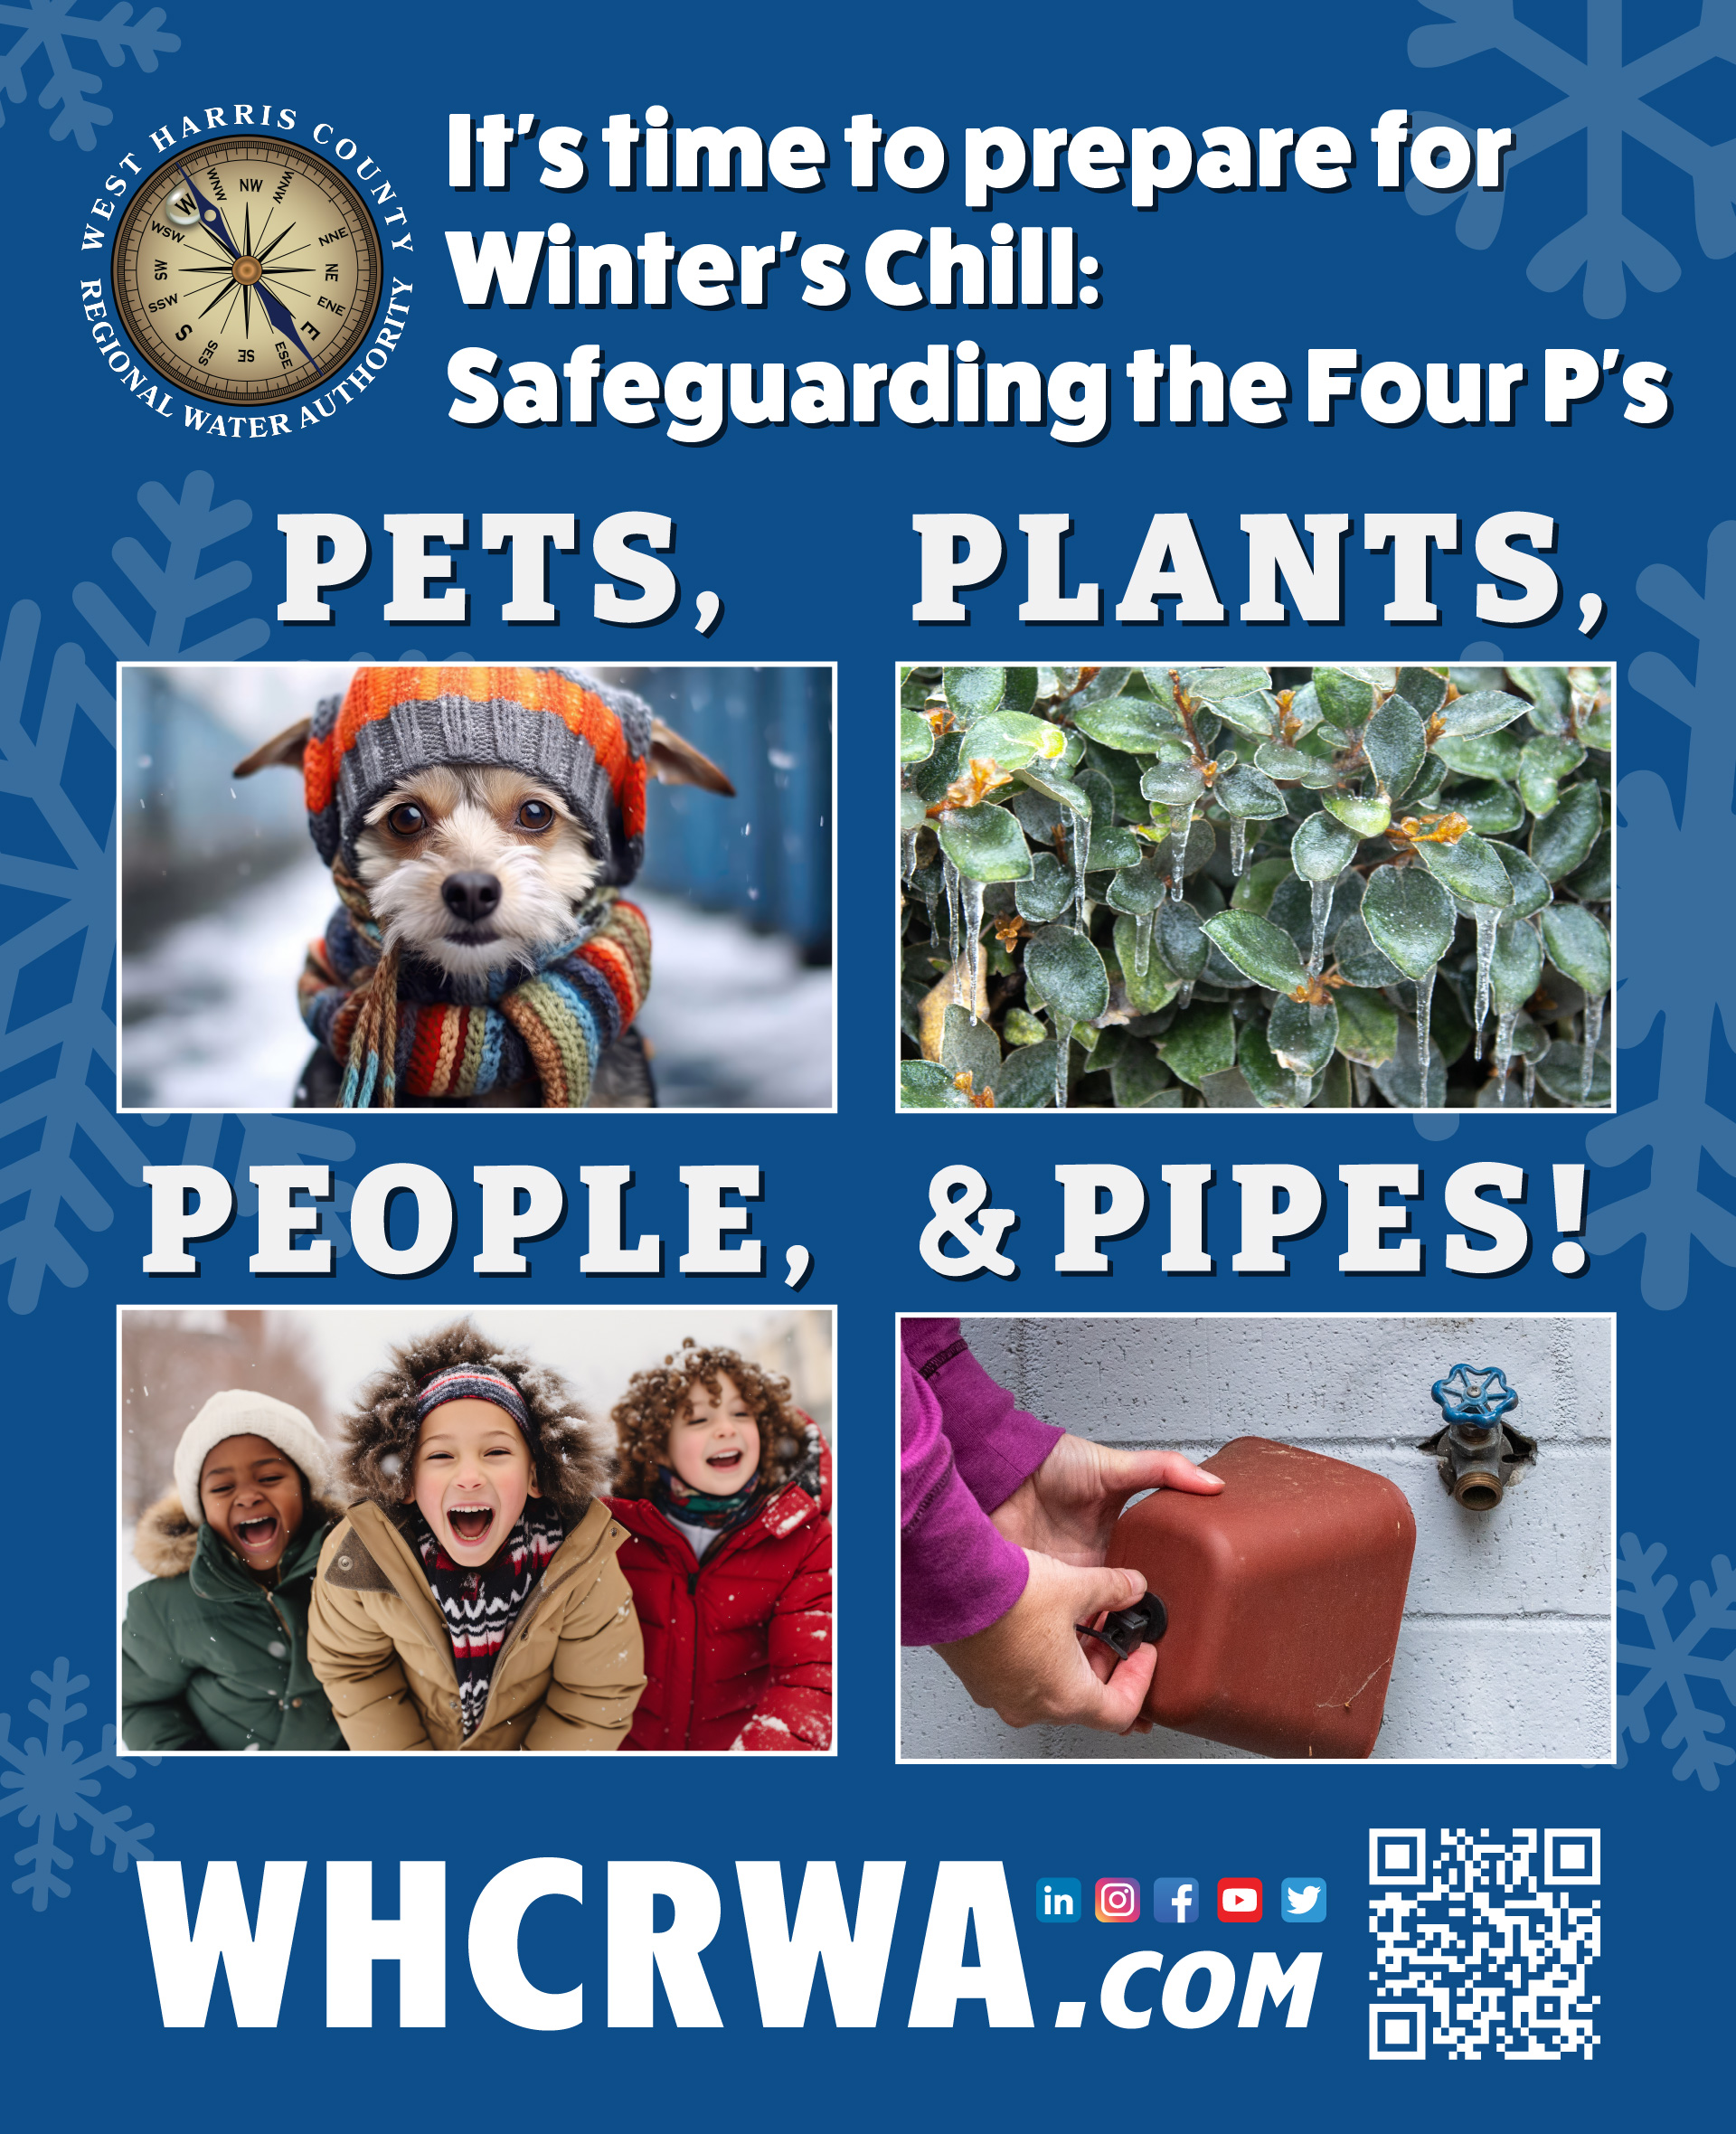 Protect pets plants people and pipes